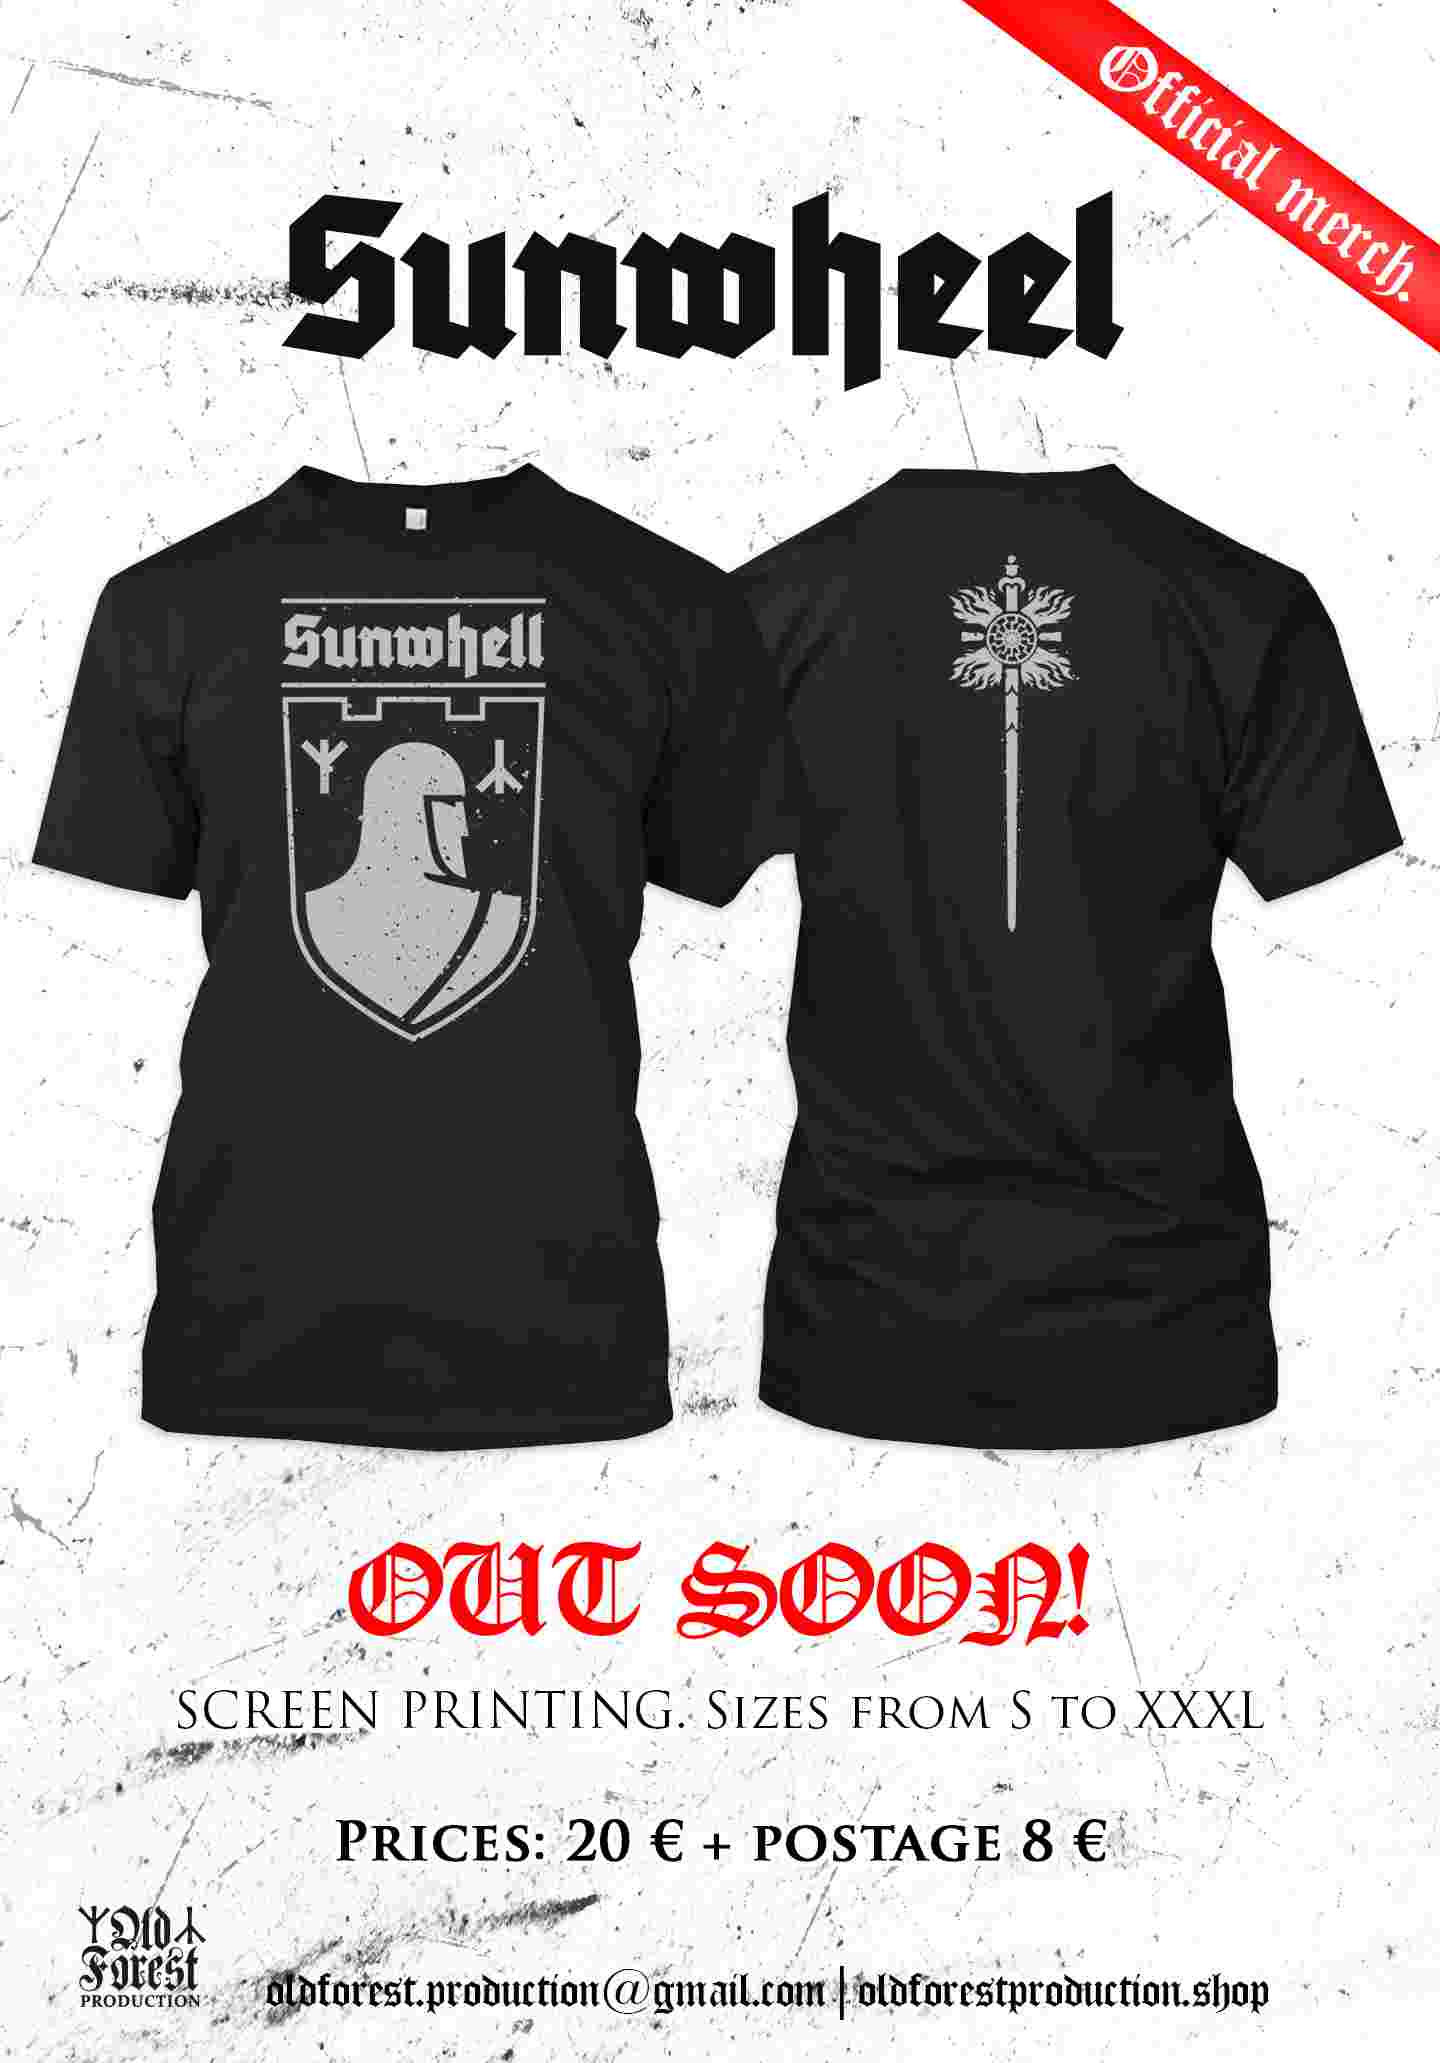 Sunwheel - Official TS black lim.30 - Old Forest Production image 1